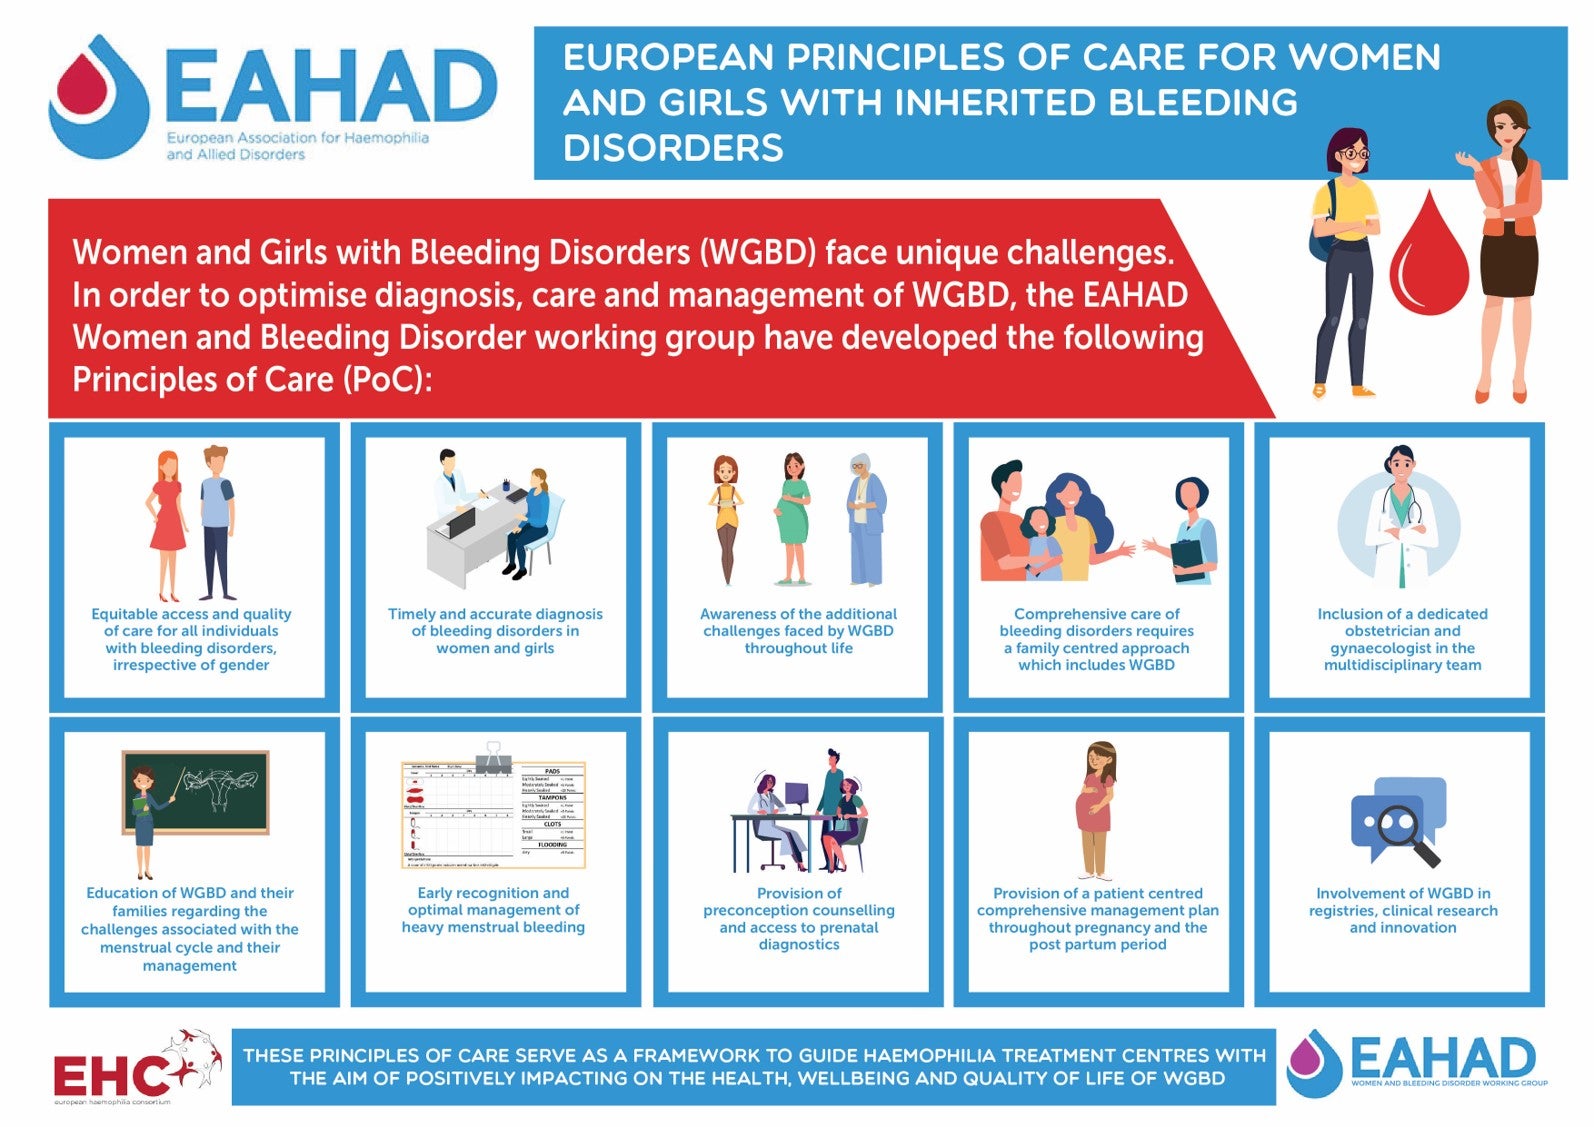 European Principles of Care for girls and women with inherited bleeding disorders